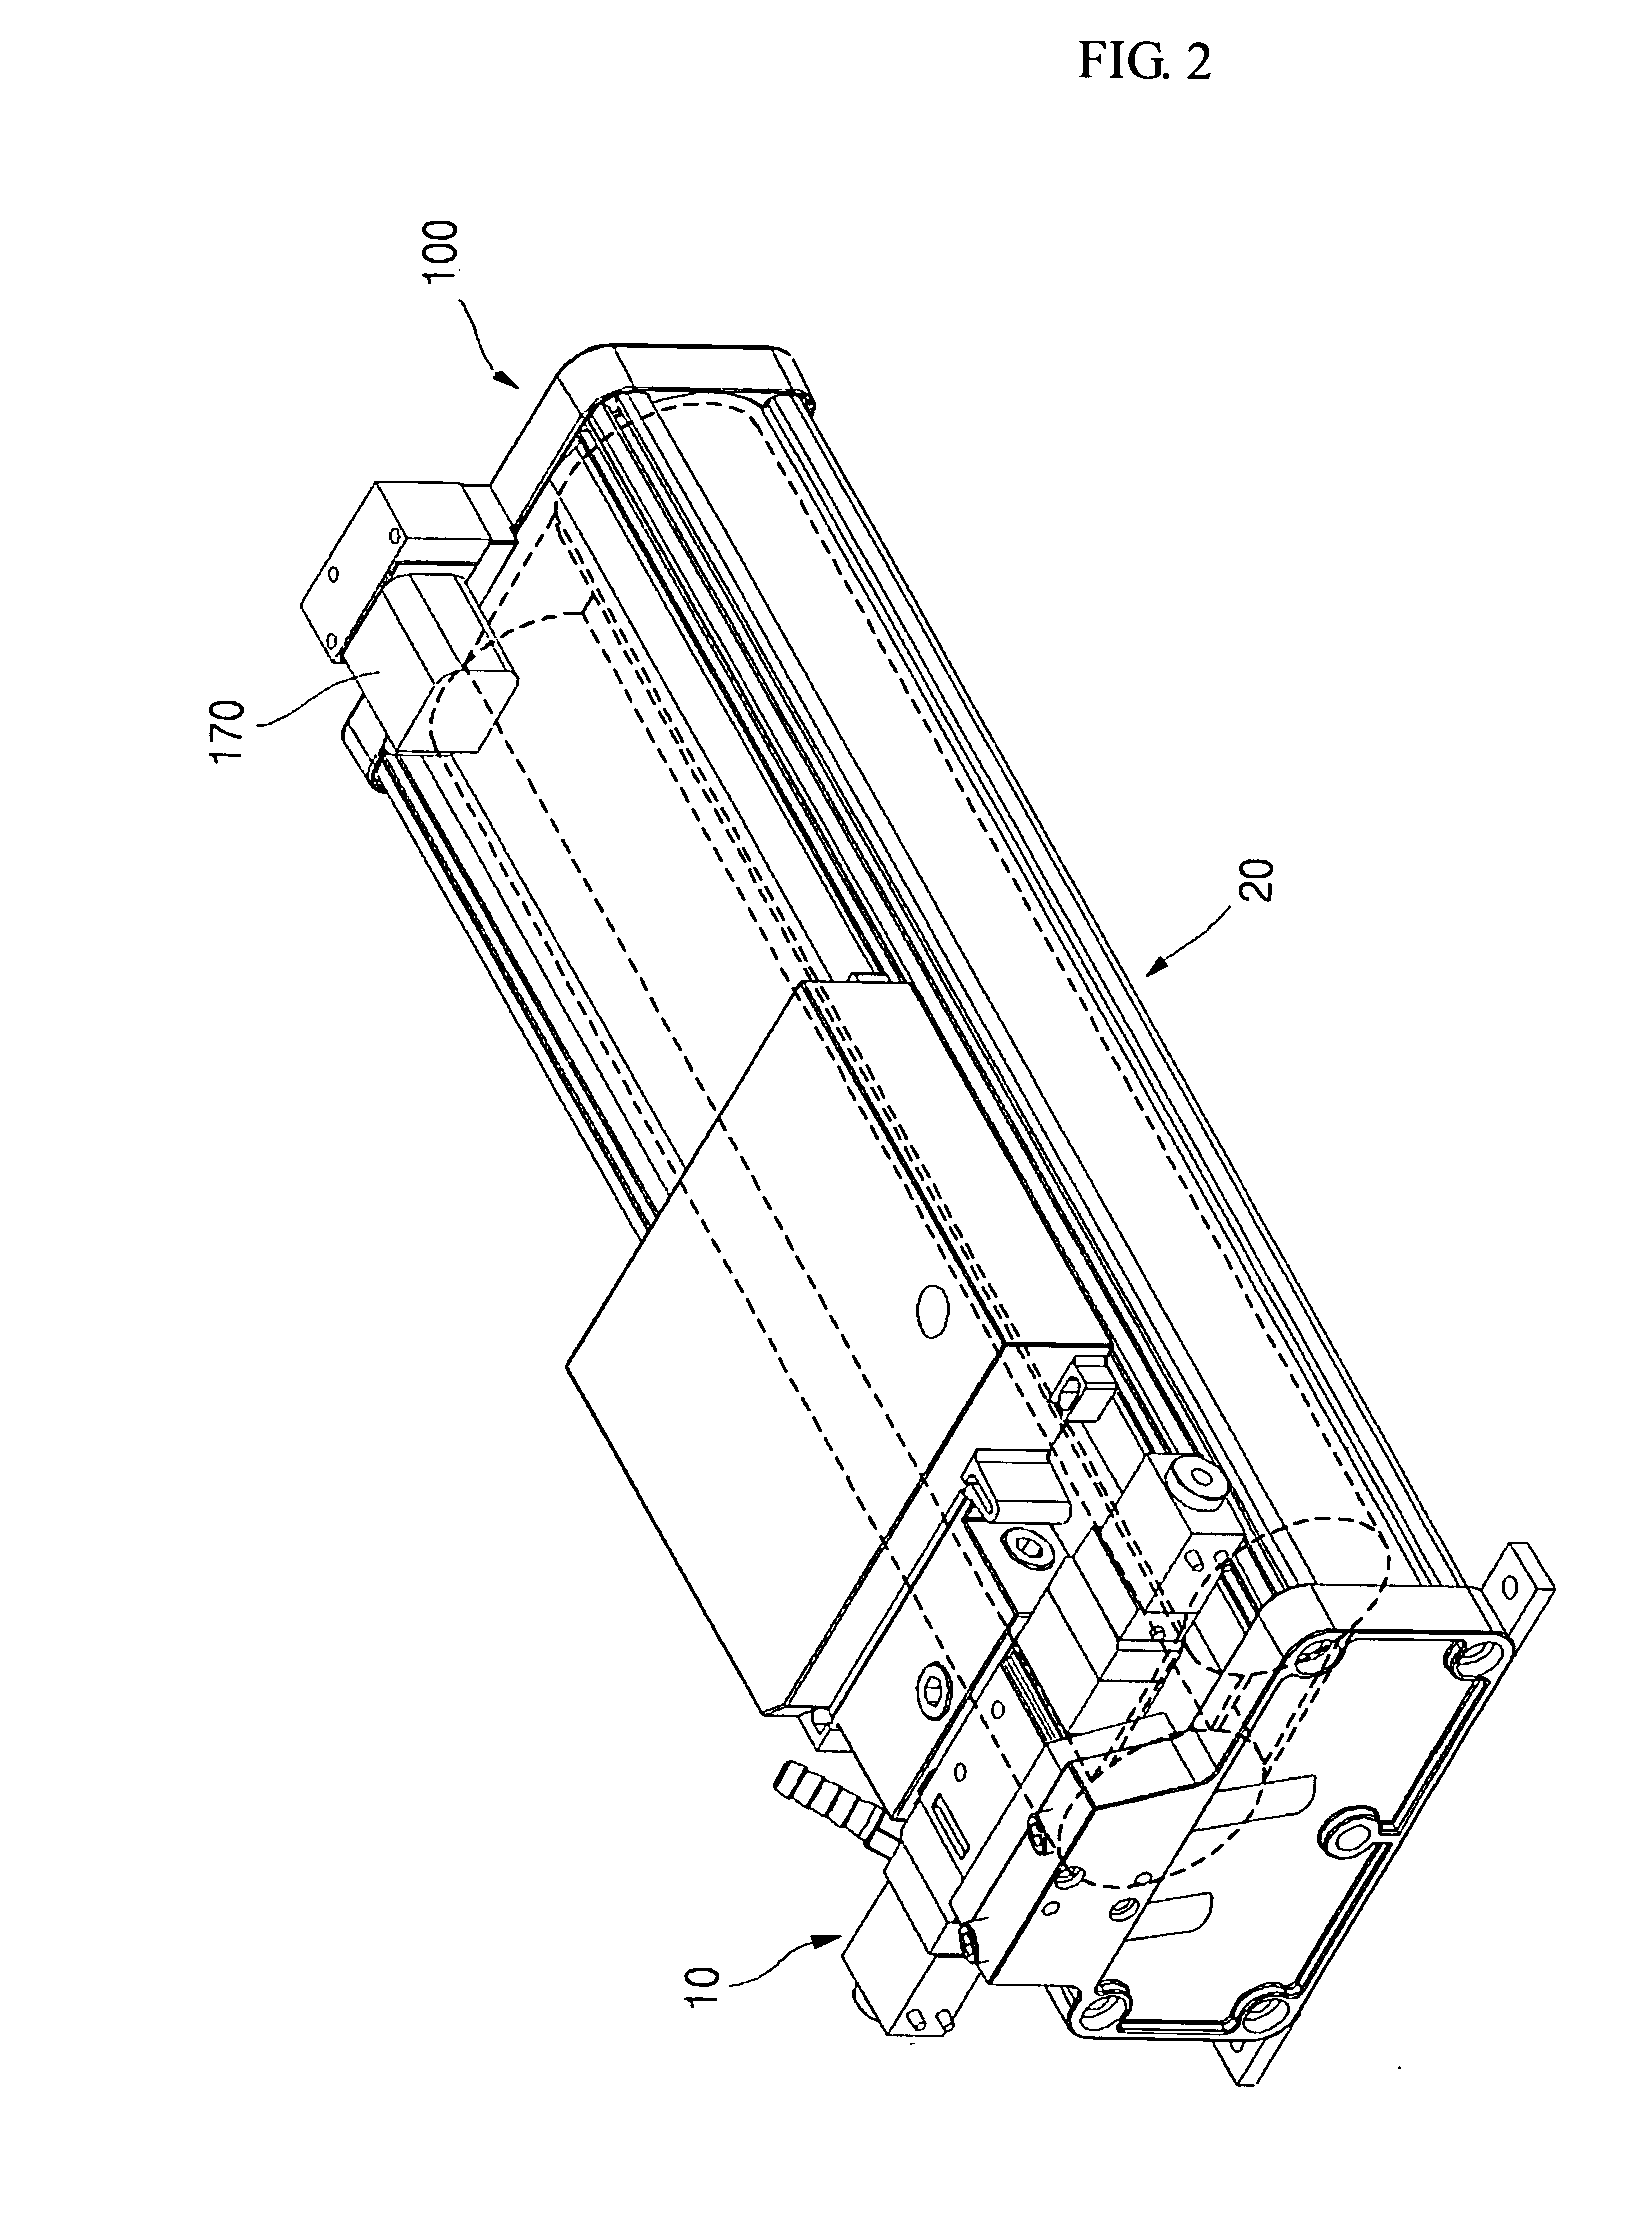 Apparatus of oxygen concentration system and method thereof